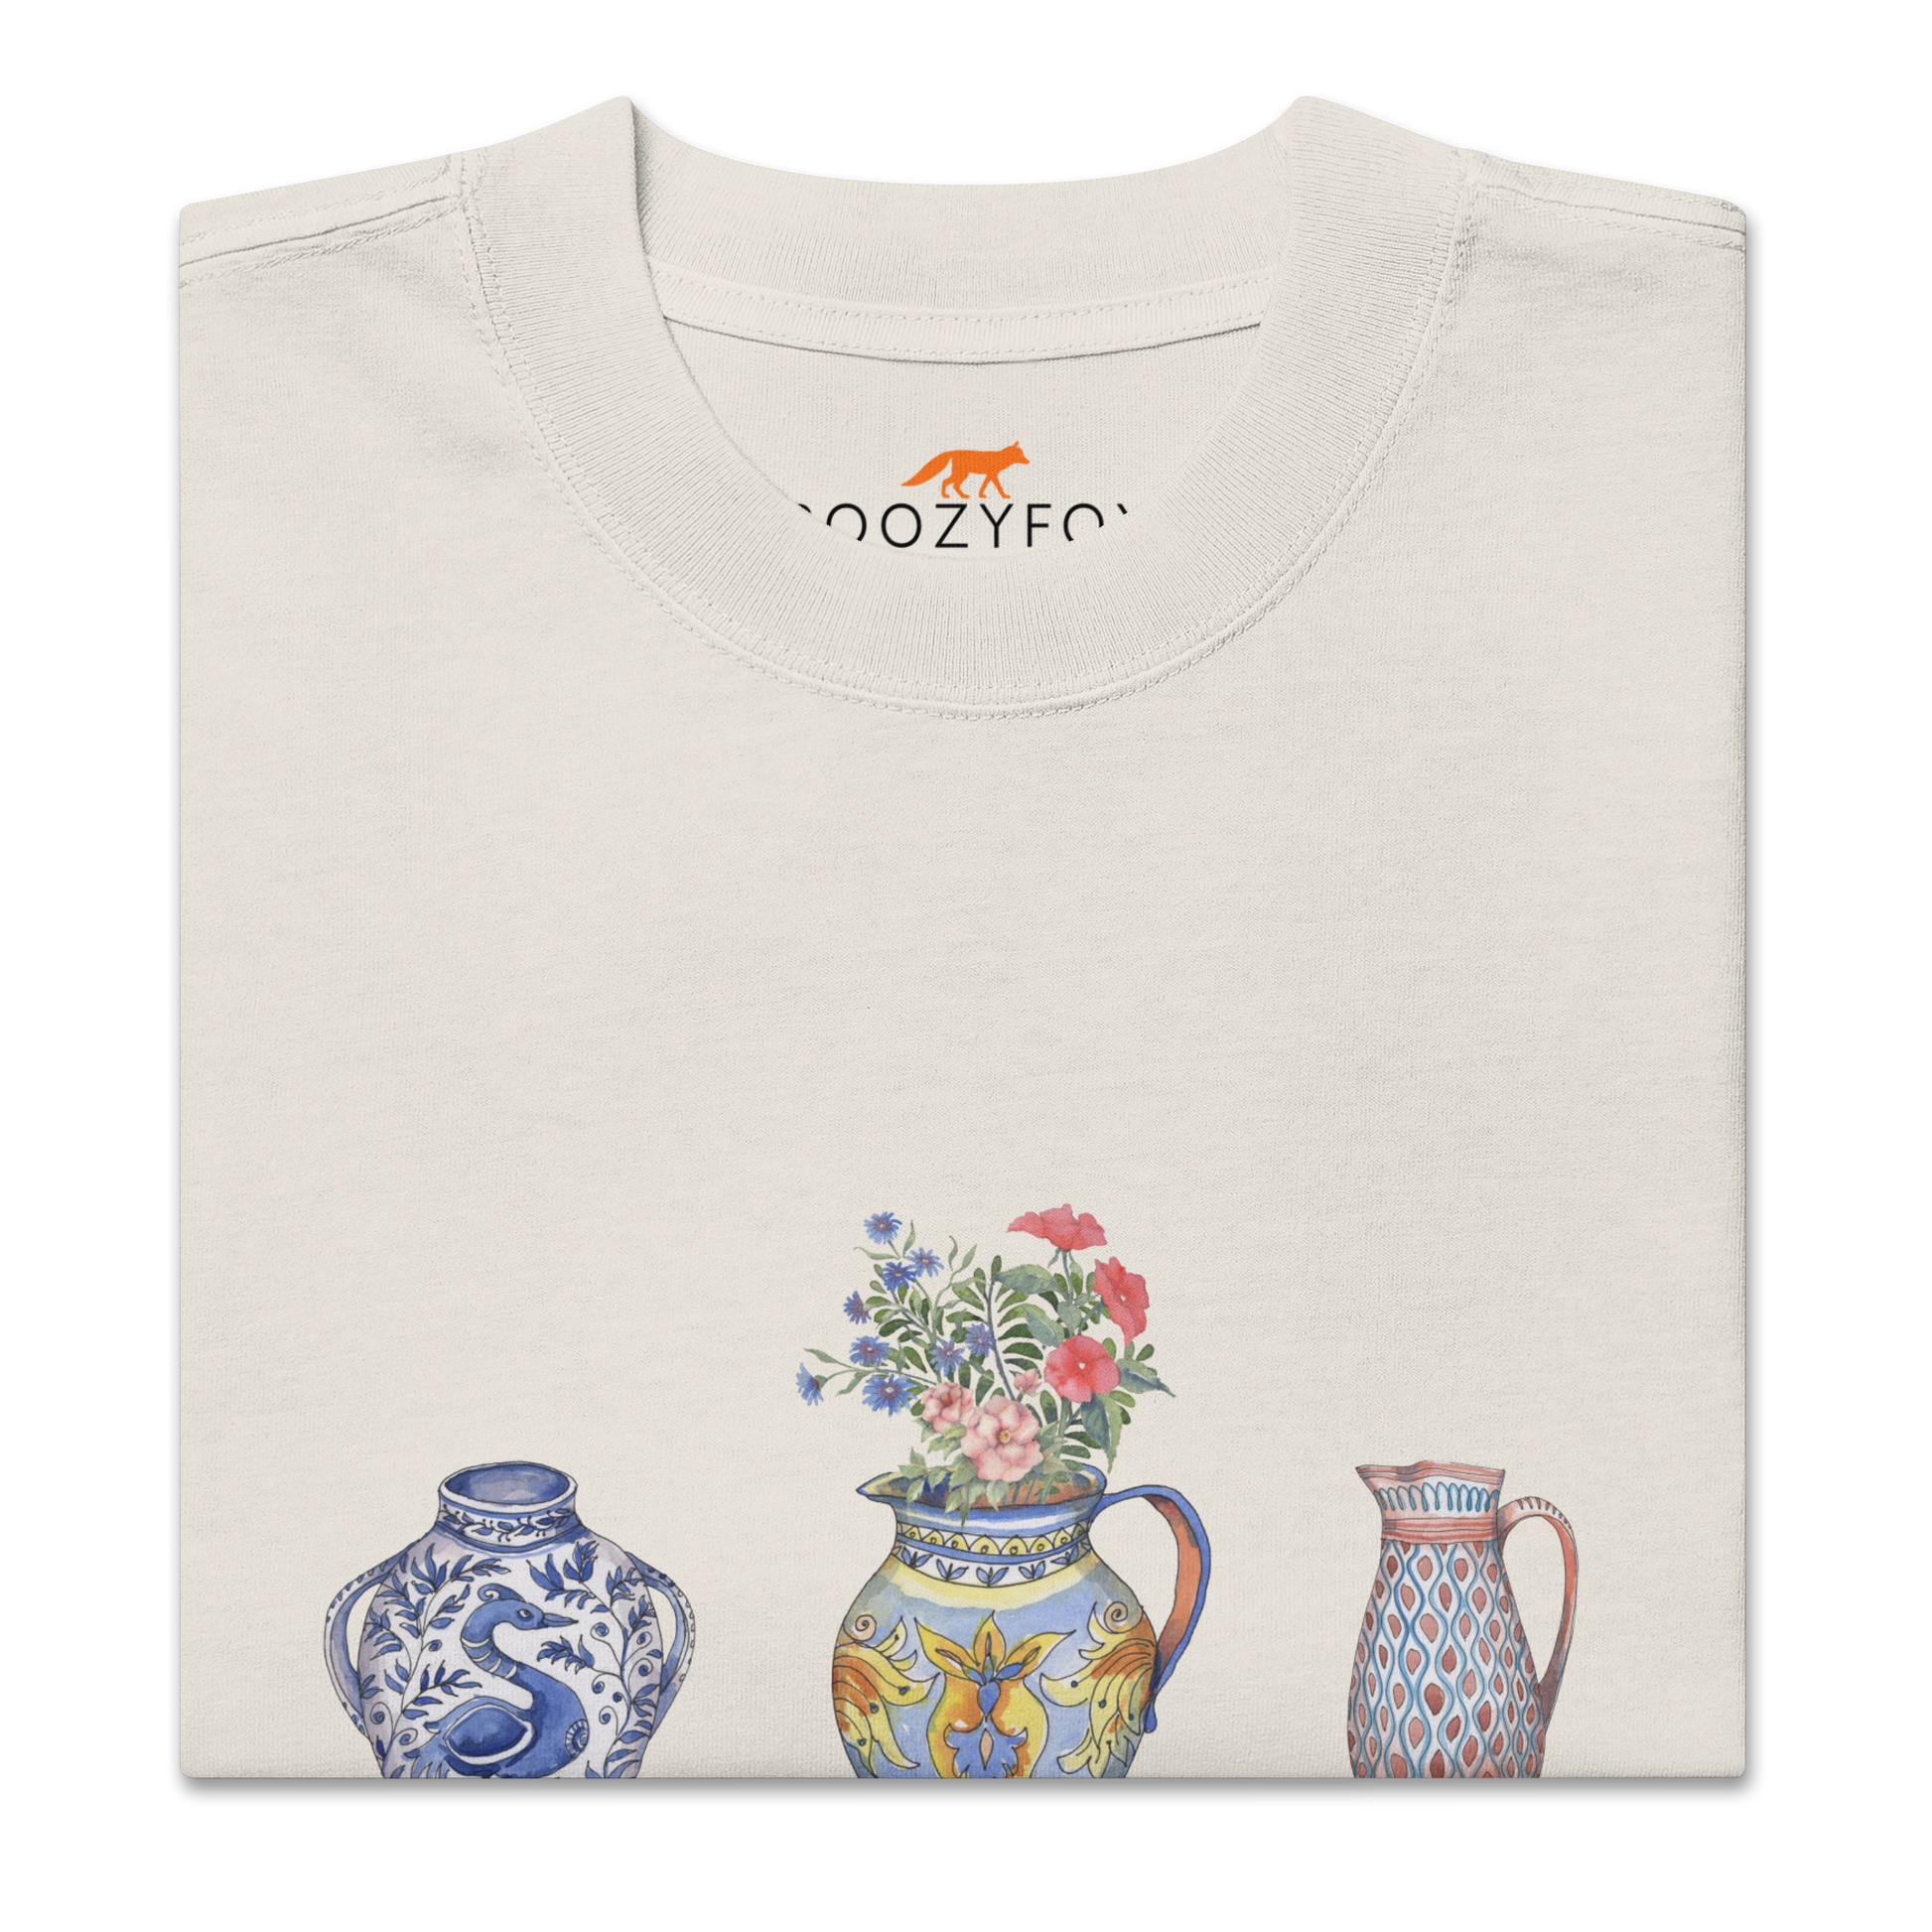 Front details of a Faded Bone Vase Oversized T-Shirt featuring a chic vase graphic on the chest - Artsy Graphic Vase Oversized Tees - Boozy Fox